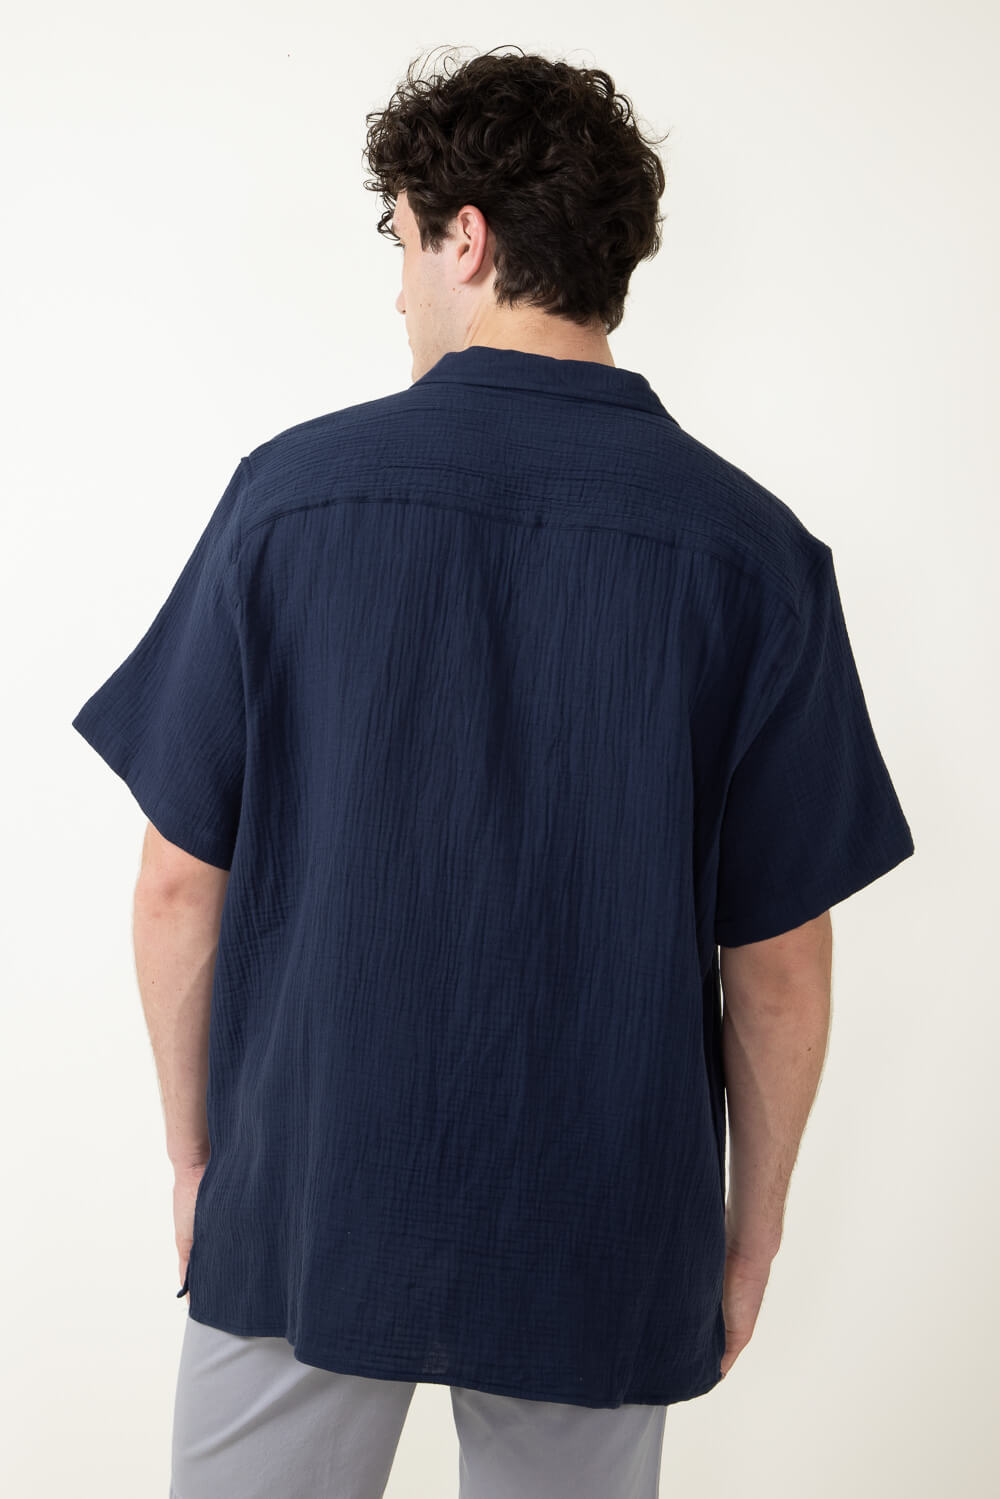 Woven Gauze Button Up for Men in Navy